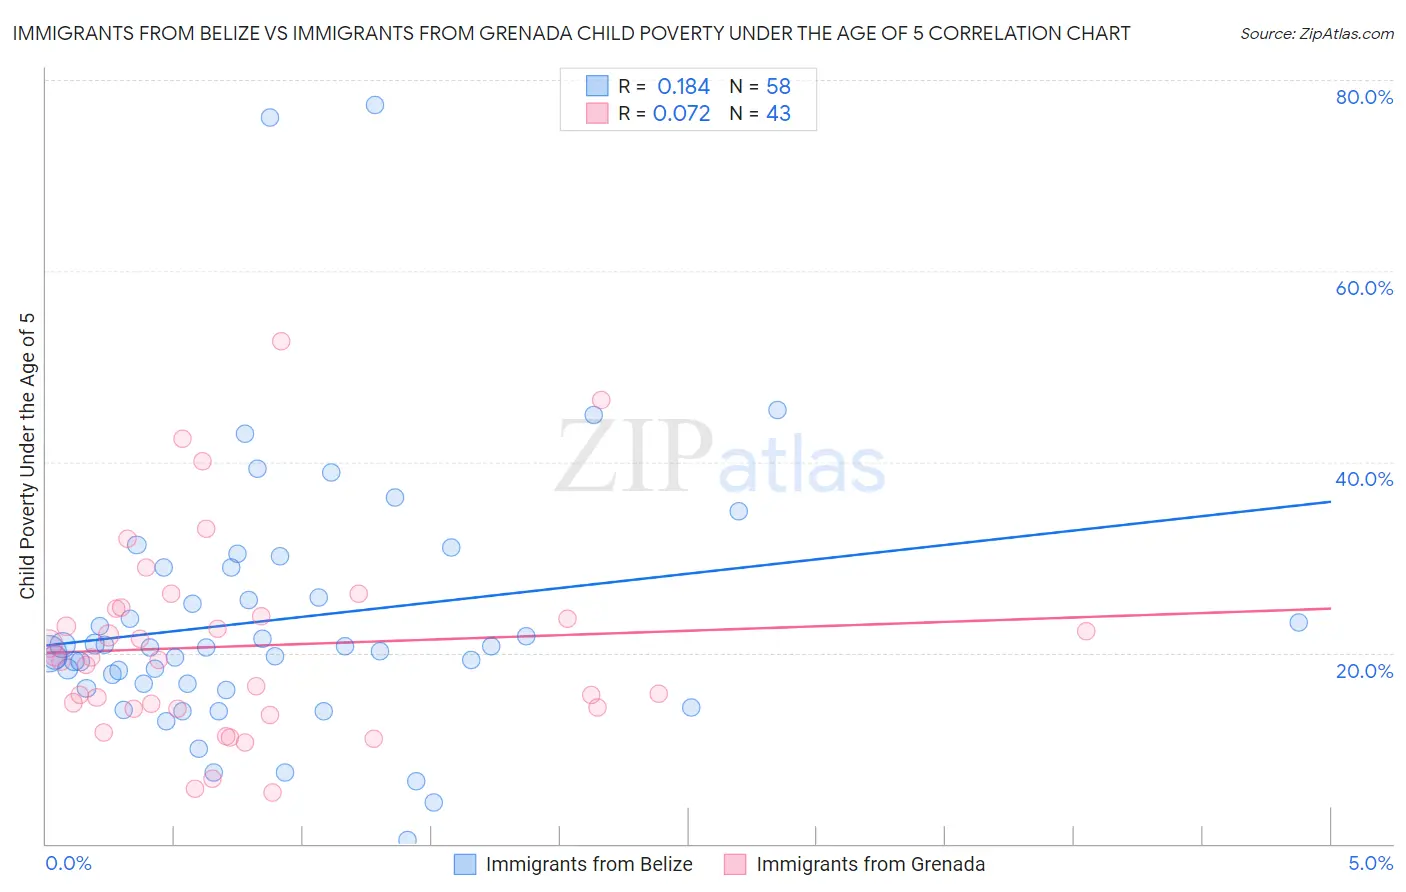 Immigrants from Belize vs Immigrants from Grenada Child Poverty Under the Age of 5